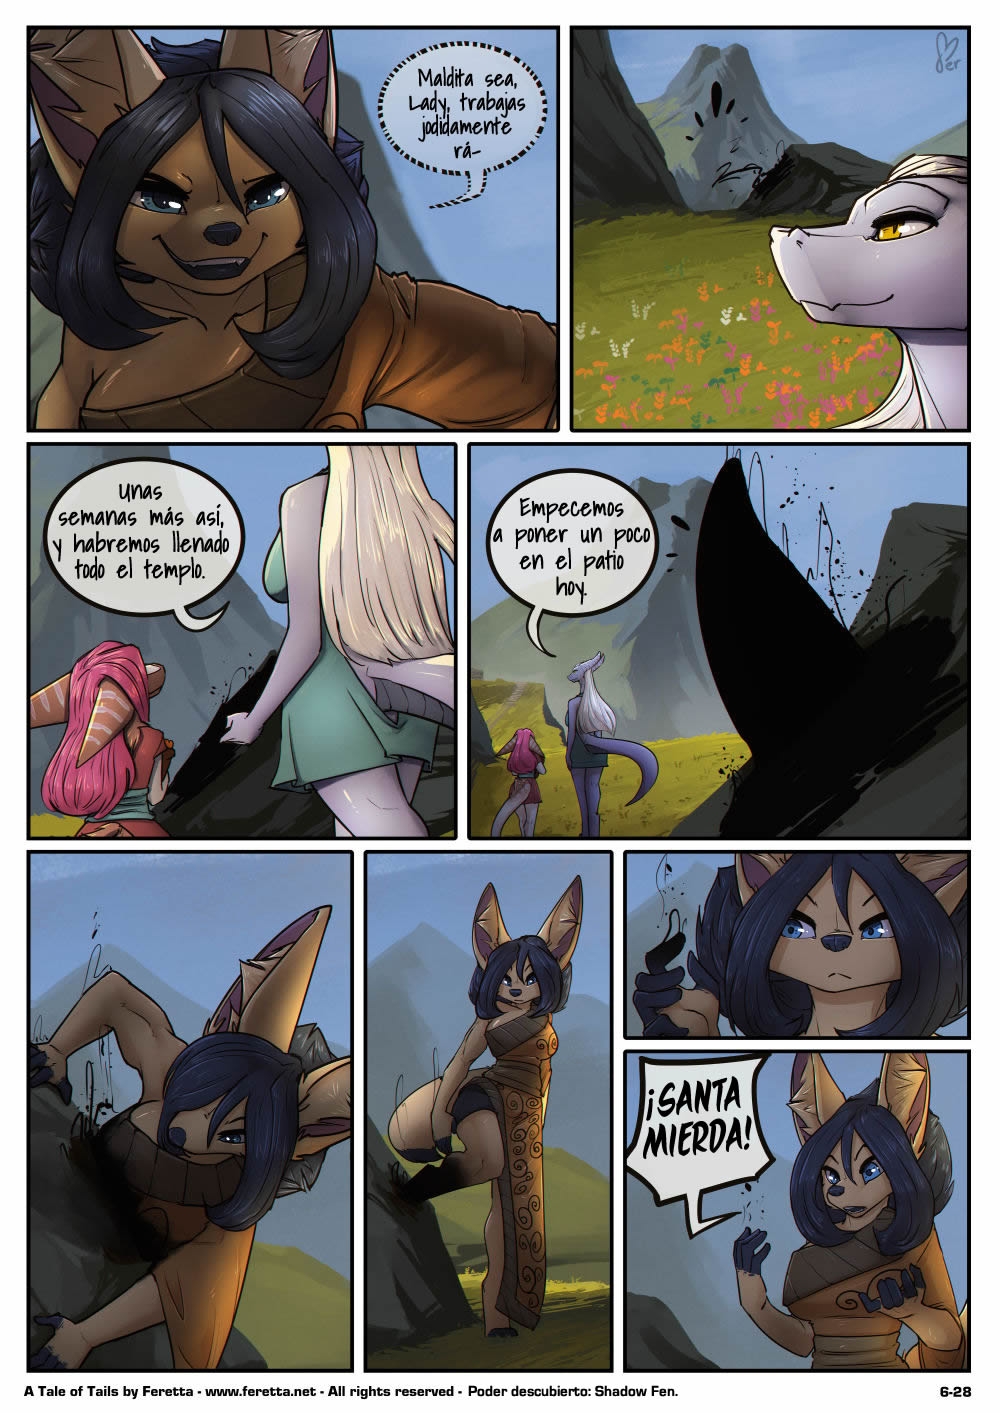 [Feretta] A Tale of Tails: Chapter 6 - Paths converge / Los caminos convergen [Spanish] [Red Fox Makkan] 28